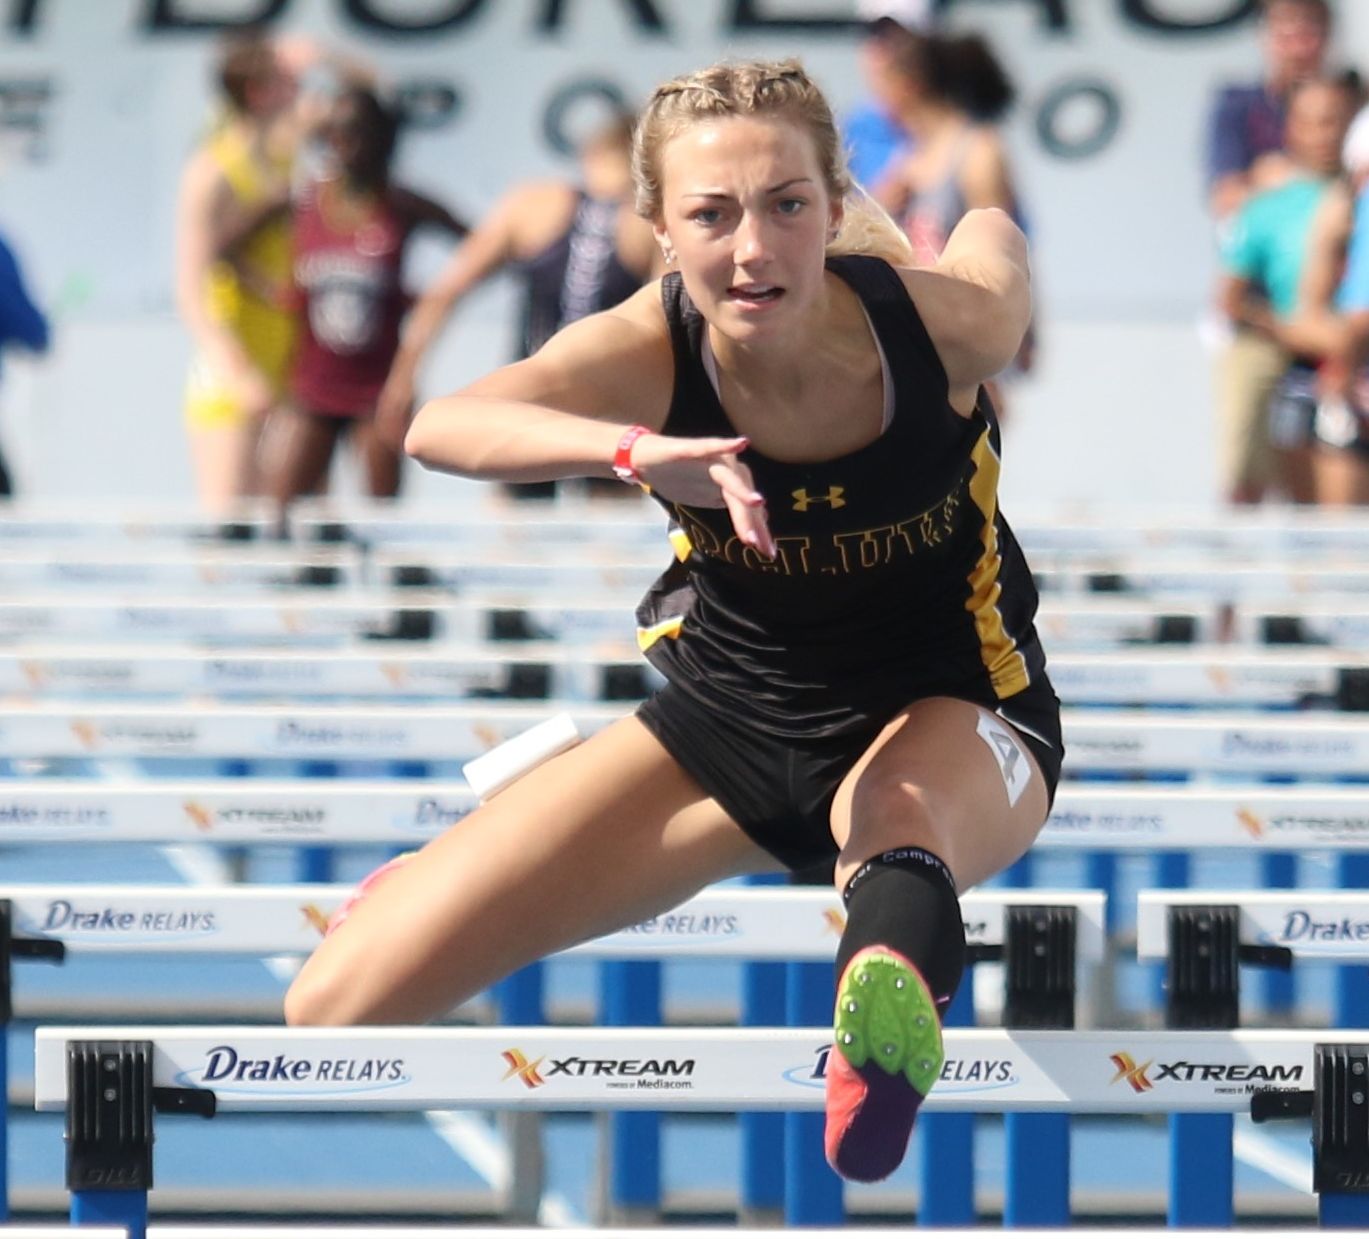 BCLUW hurdler Lizzie Garber placed 2nd in the 100 hurdles at the state meet in 2021. (Tyler Anderson/MAP photo)